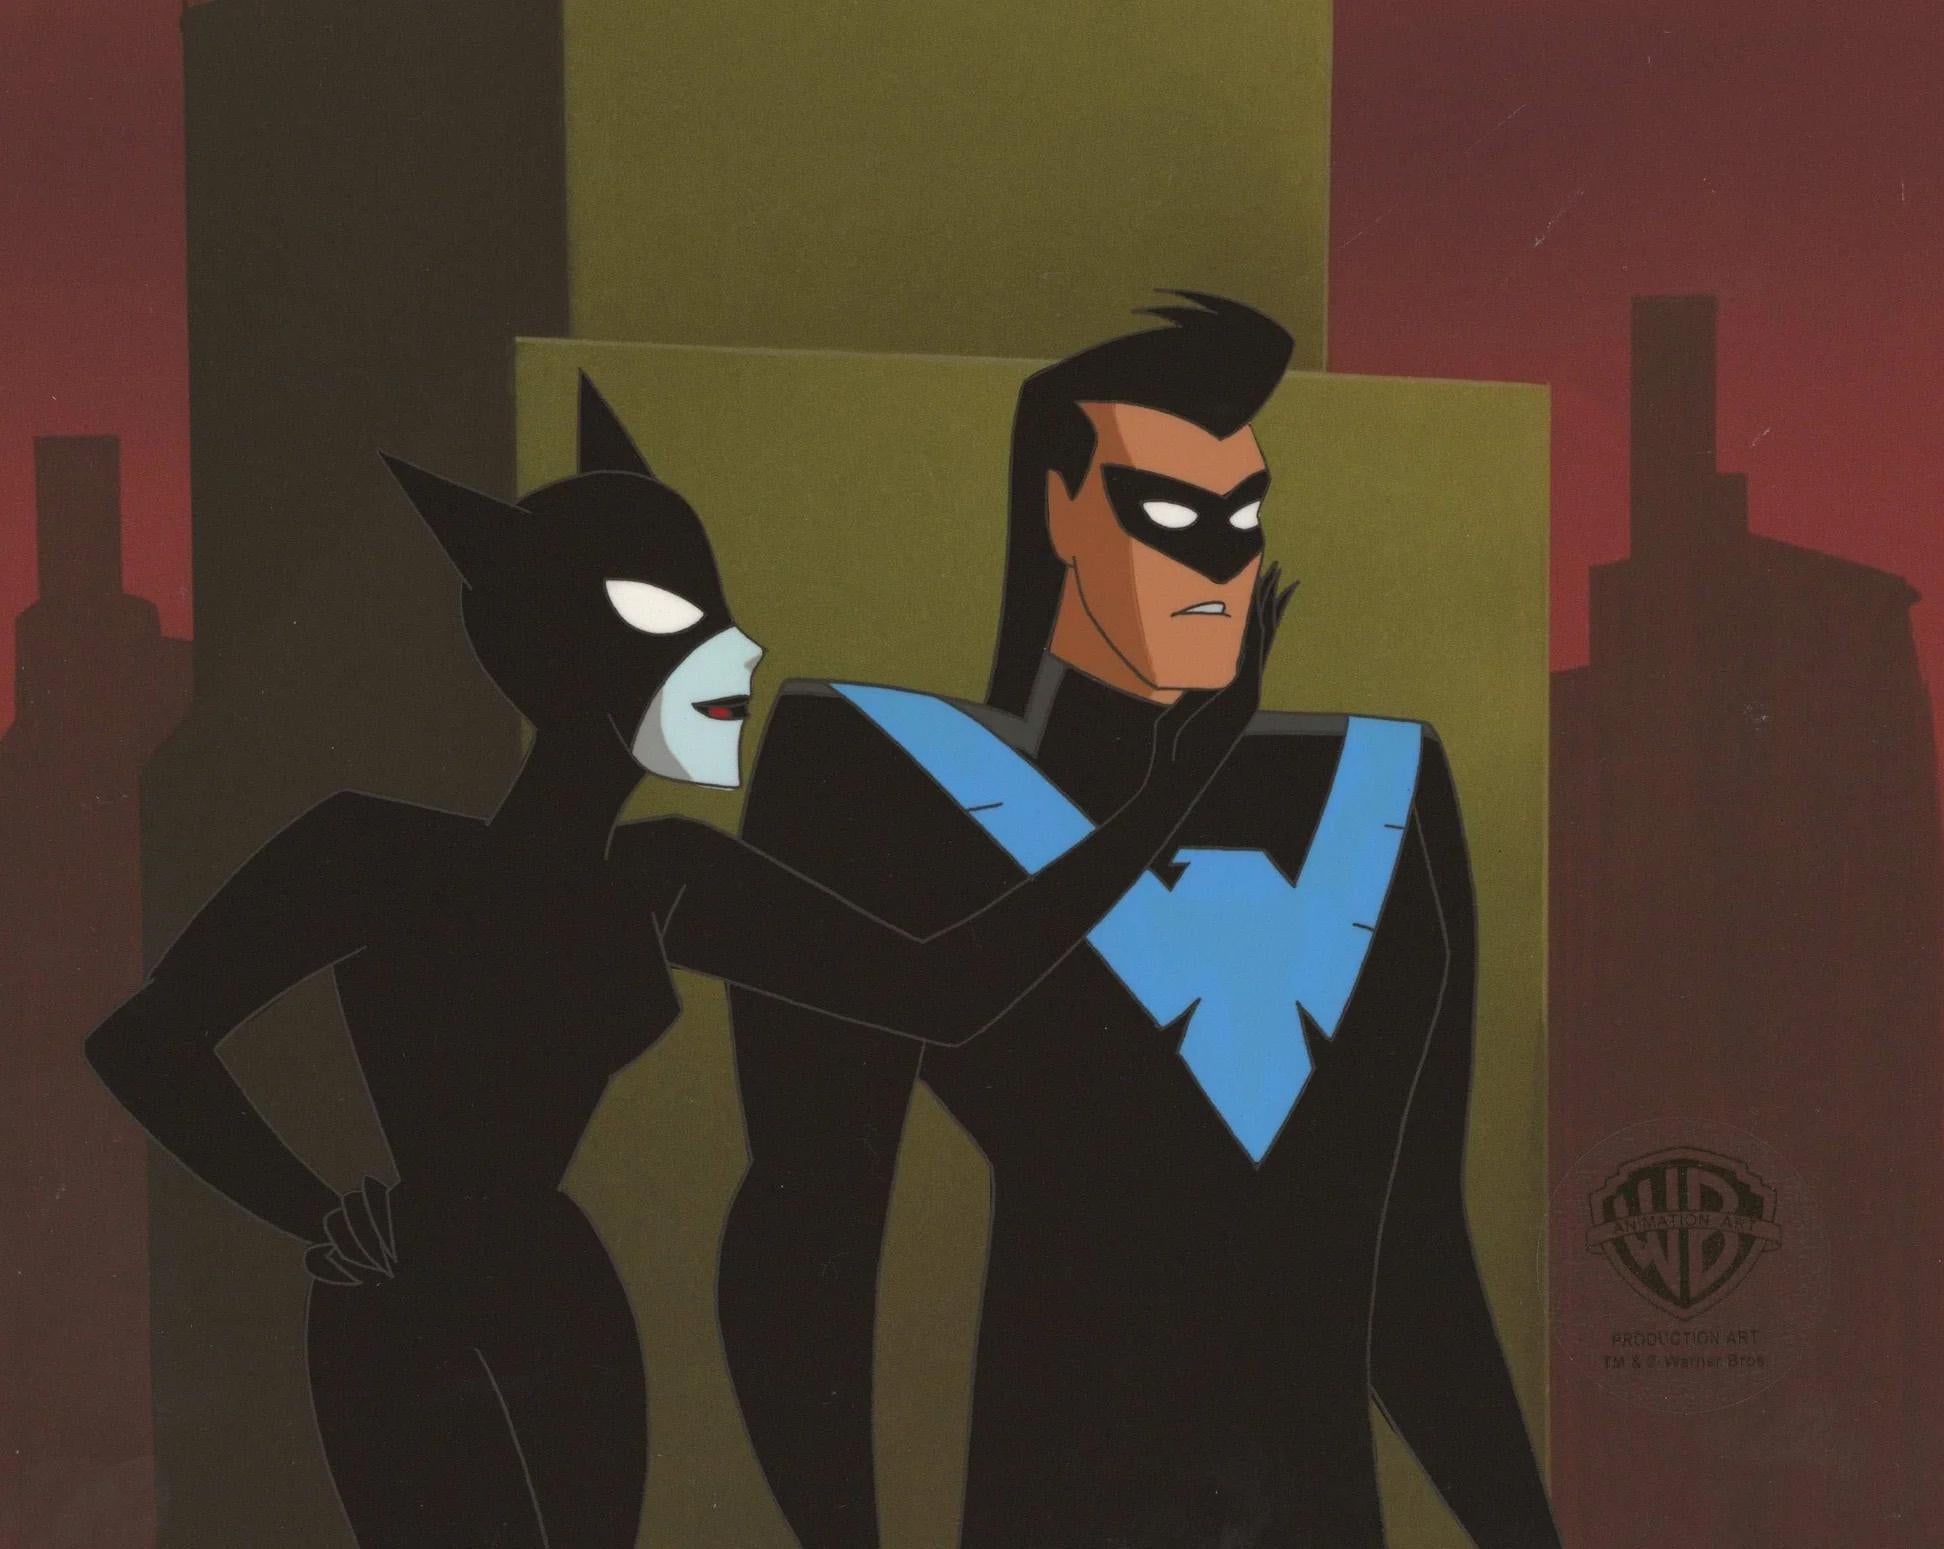 The New Batman Adventures Original Production Cel: Catwoman and Nightwing - Art by DC Comics Studio Artists